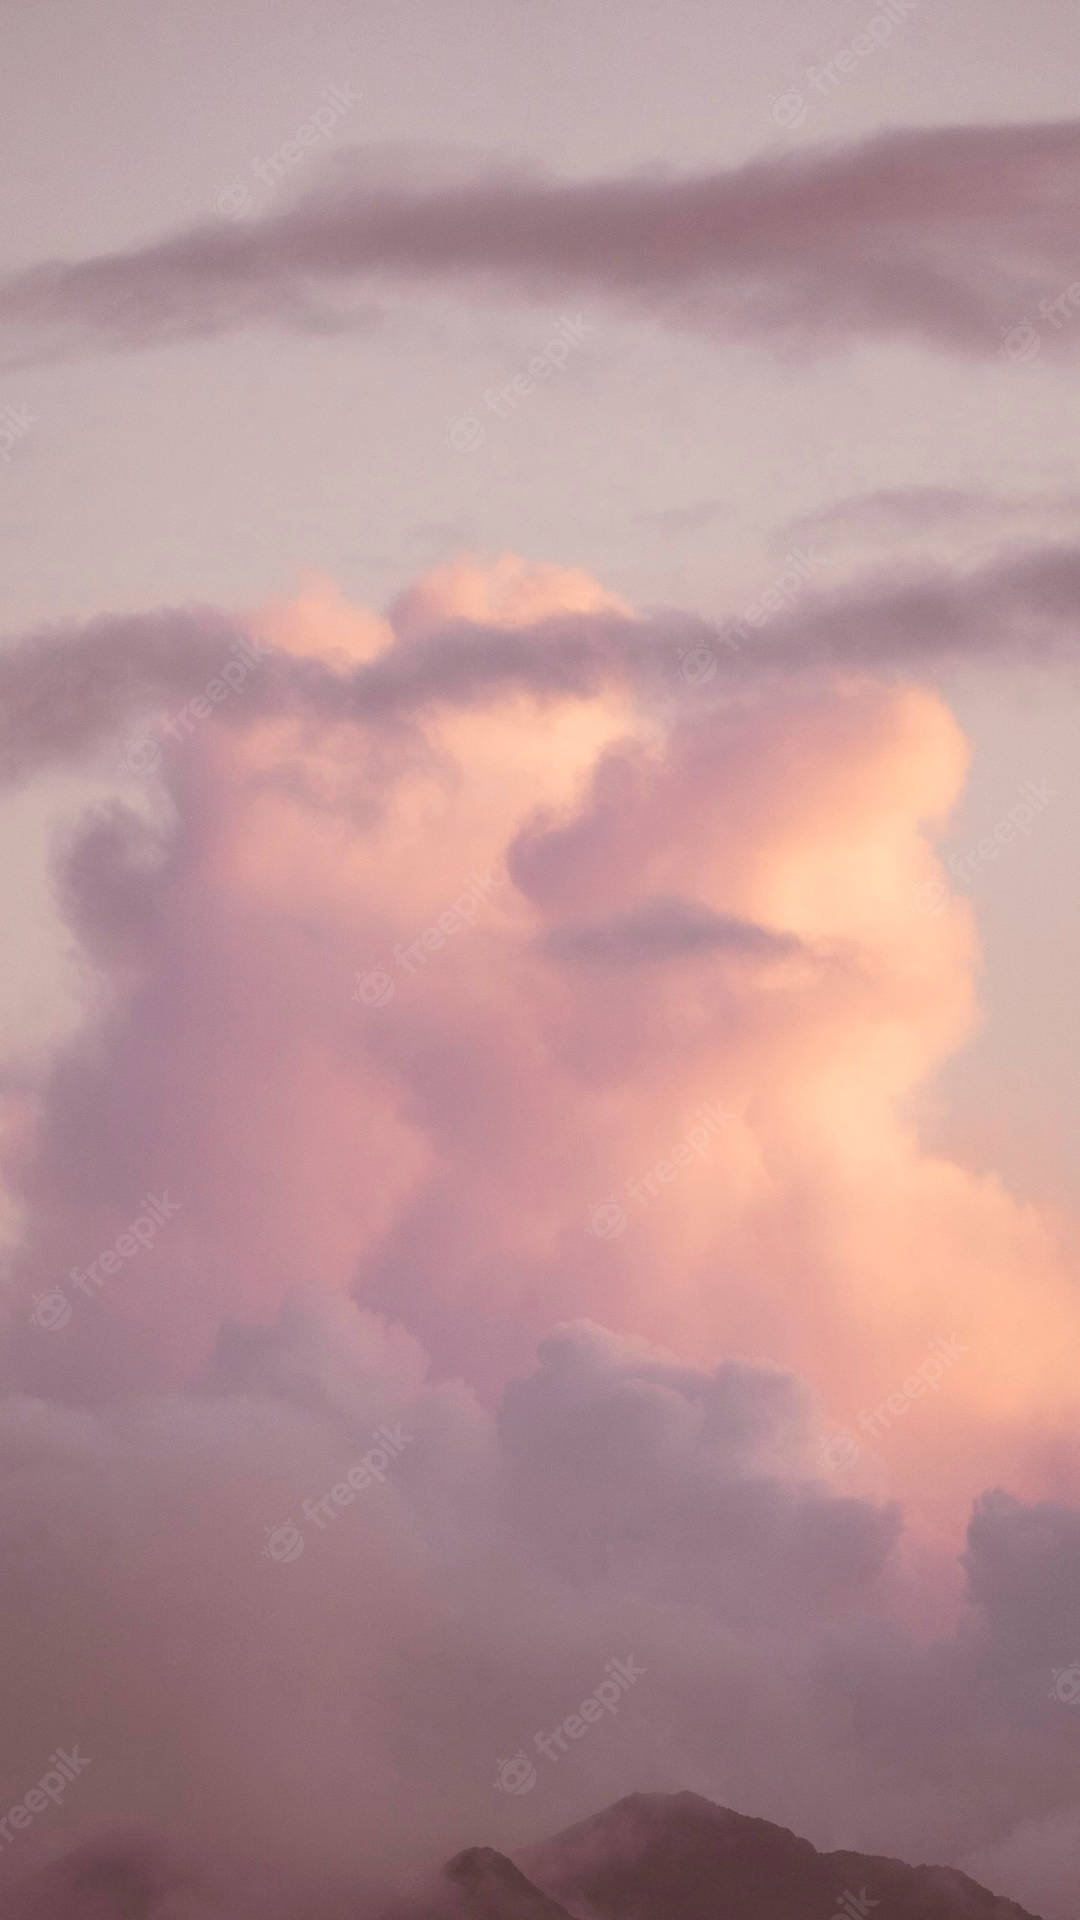 Check out the new Clouds Phone Wallpaper